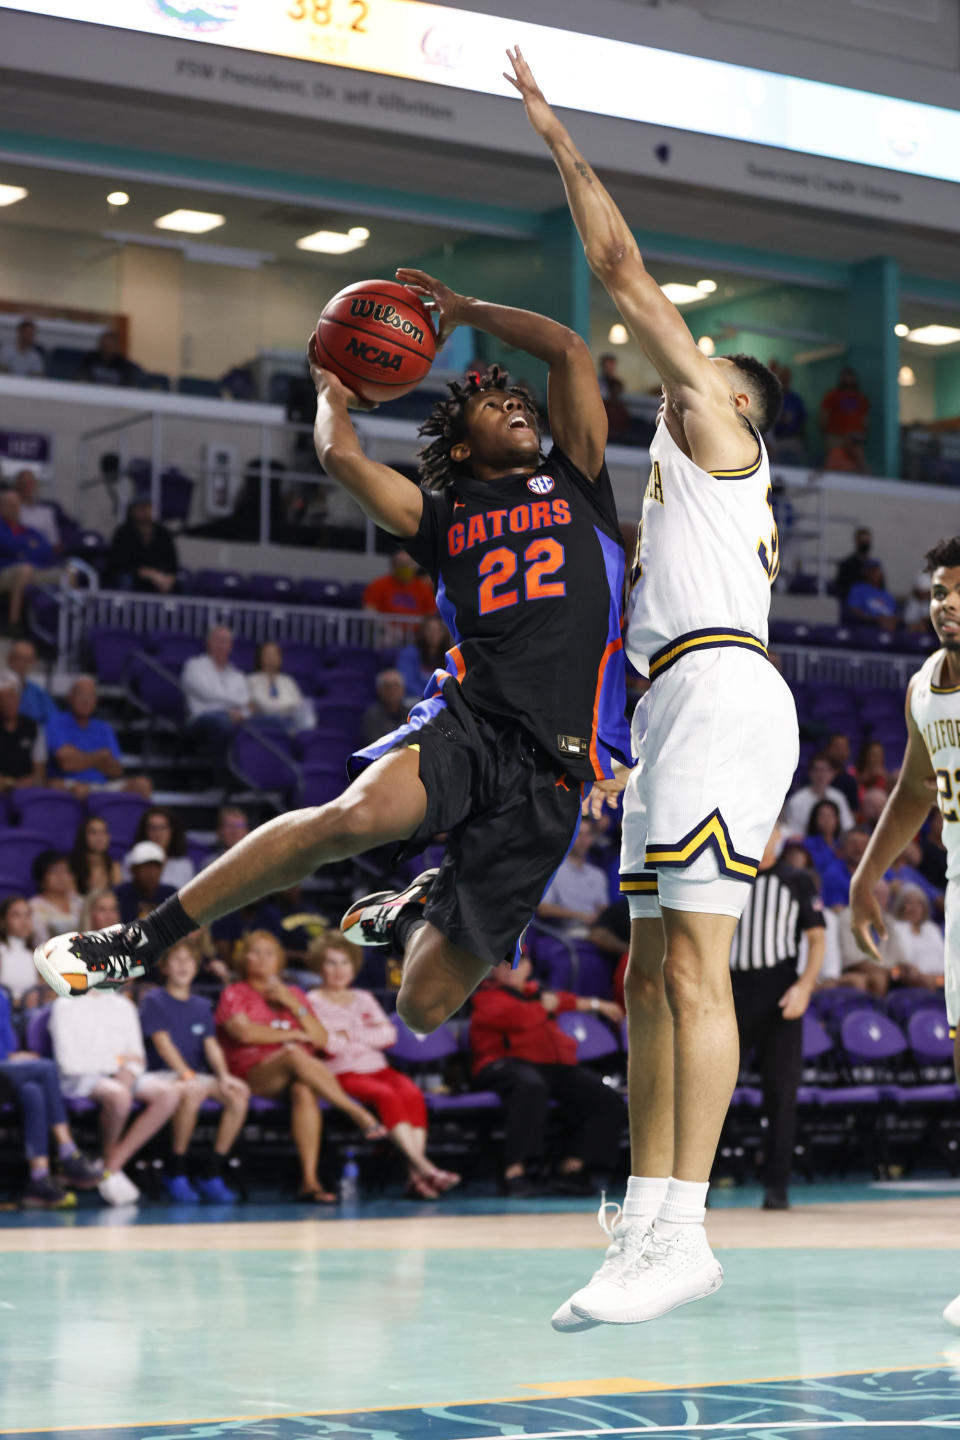 Florida guard Tyree Appleby (22) drives to the basket against California guard Jordan Shepherd (31) during the first half of an NCAA college basketball game Monday, Nov. 22, 2021, in Fort Myers, Fla. (AP Photo/Scott Audette)